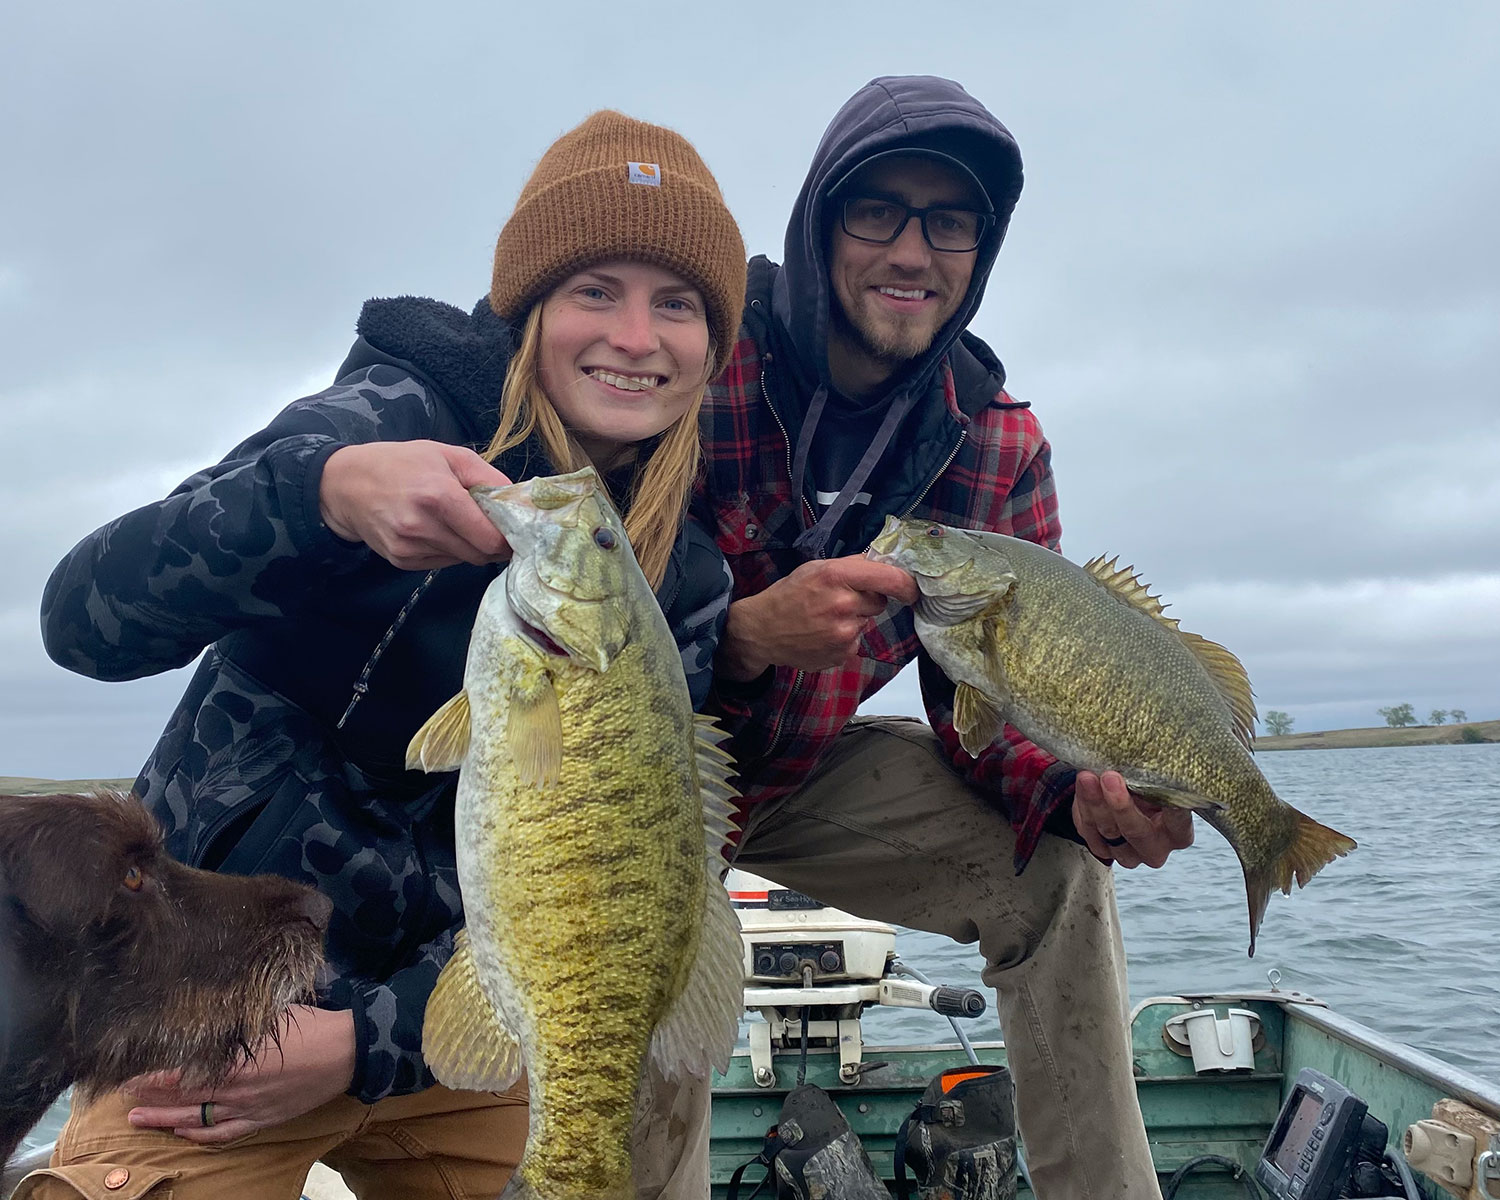 Cayla and her husband with more fish